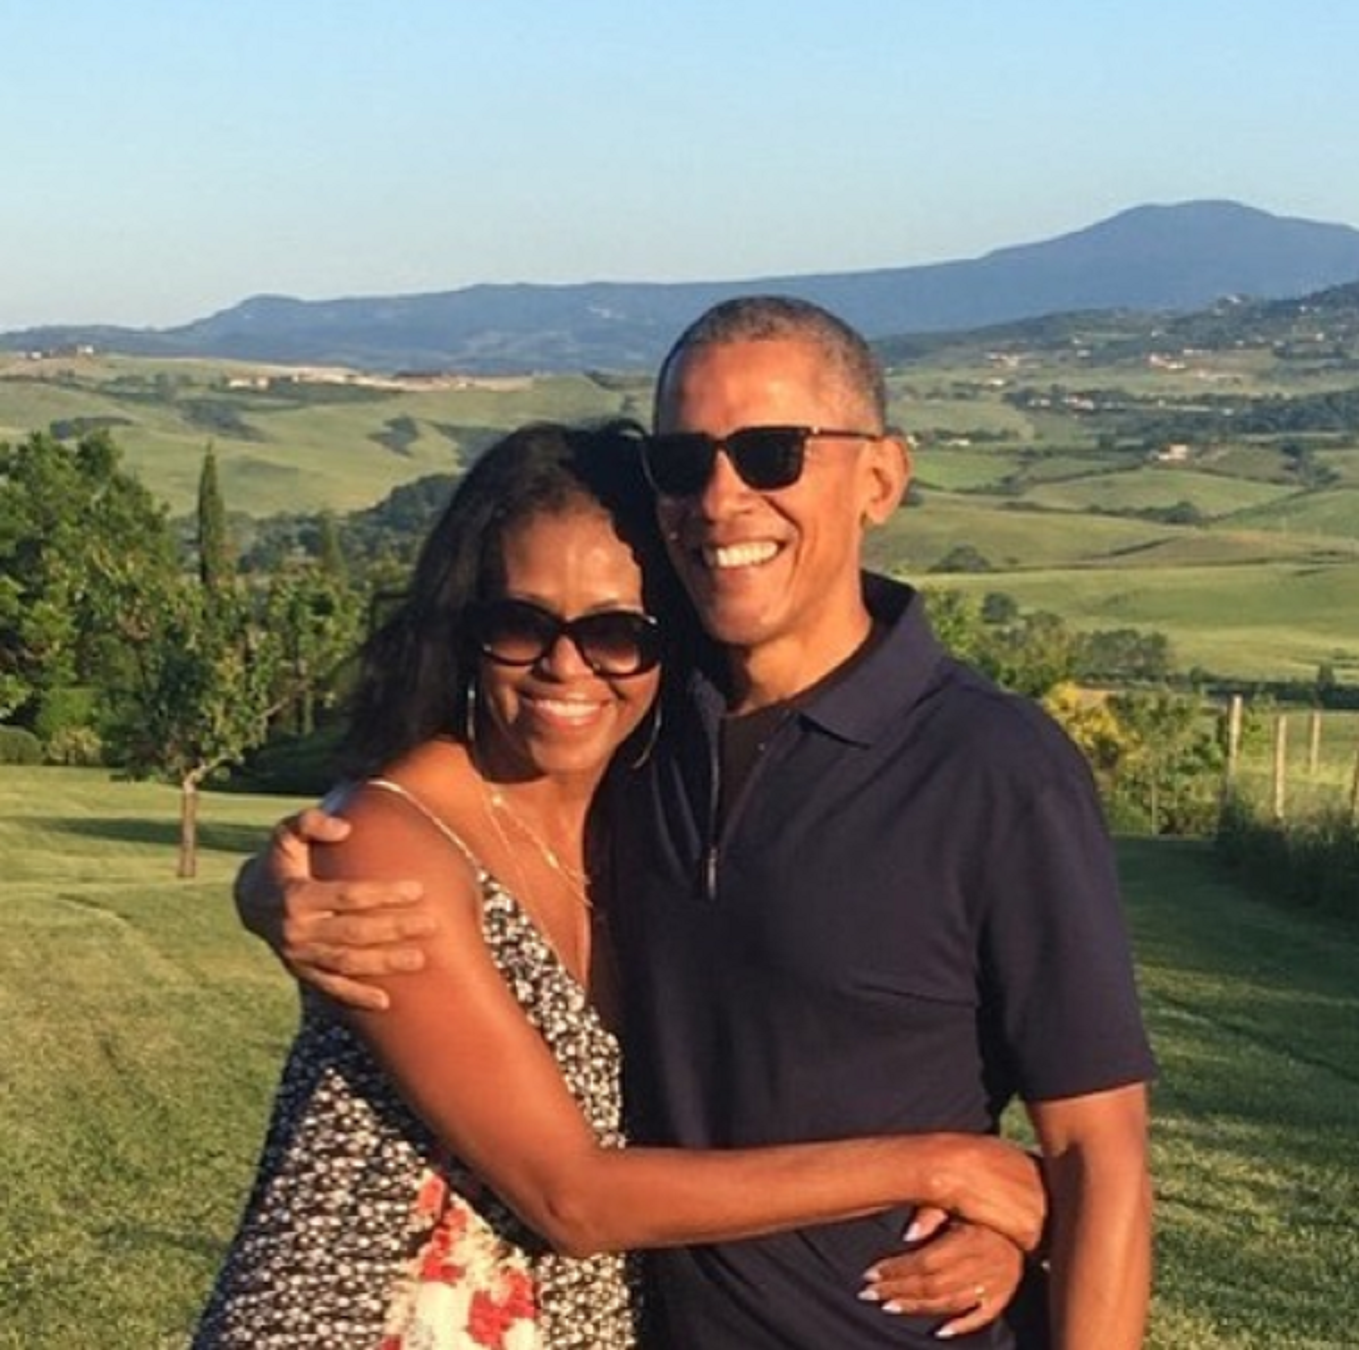 The Obamas are on Catalonia's Costa Brava for a celebrity wedding